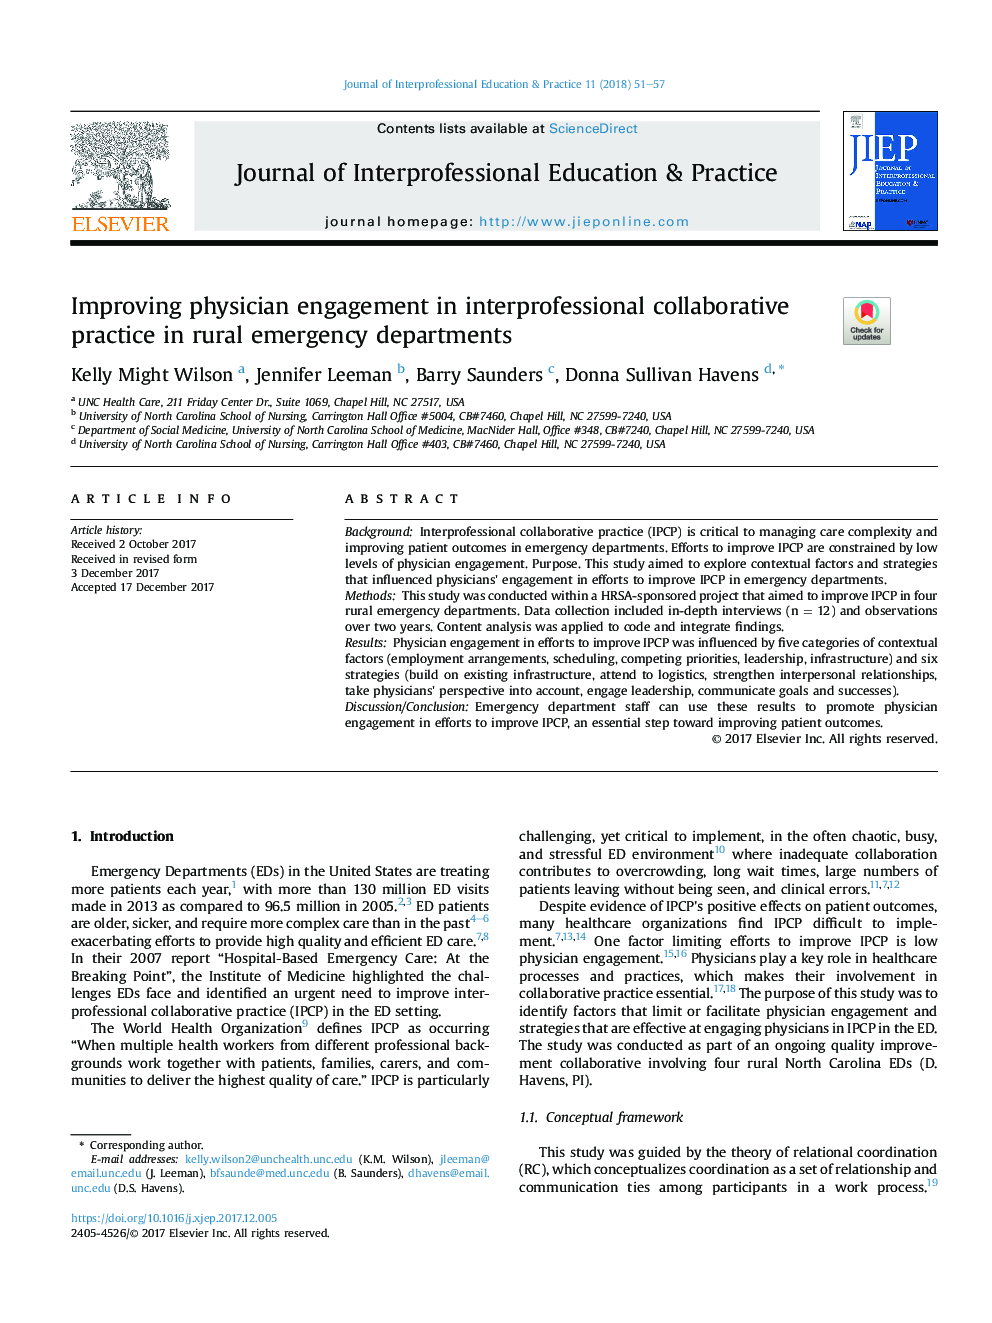 Improving physician engagement in interprofessional collaborative practice in rural emergency departments